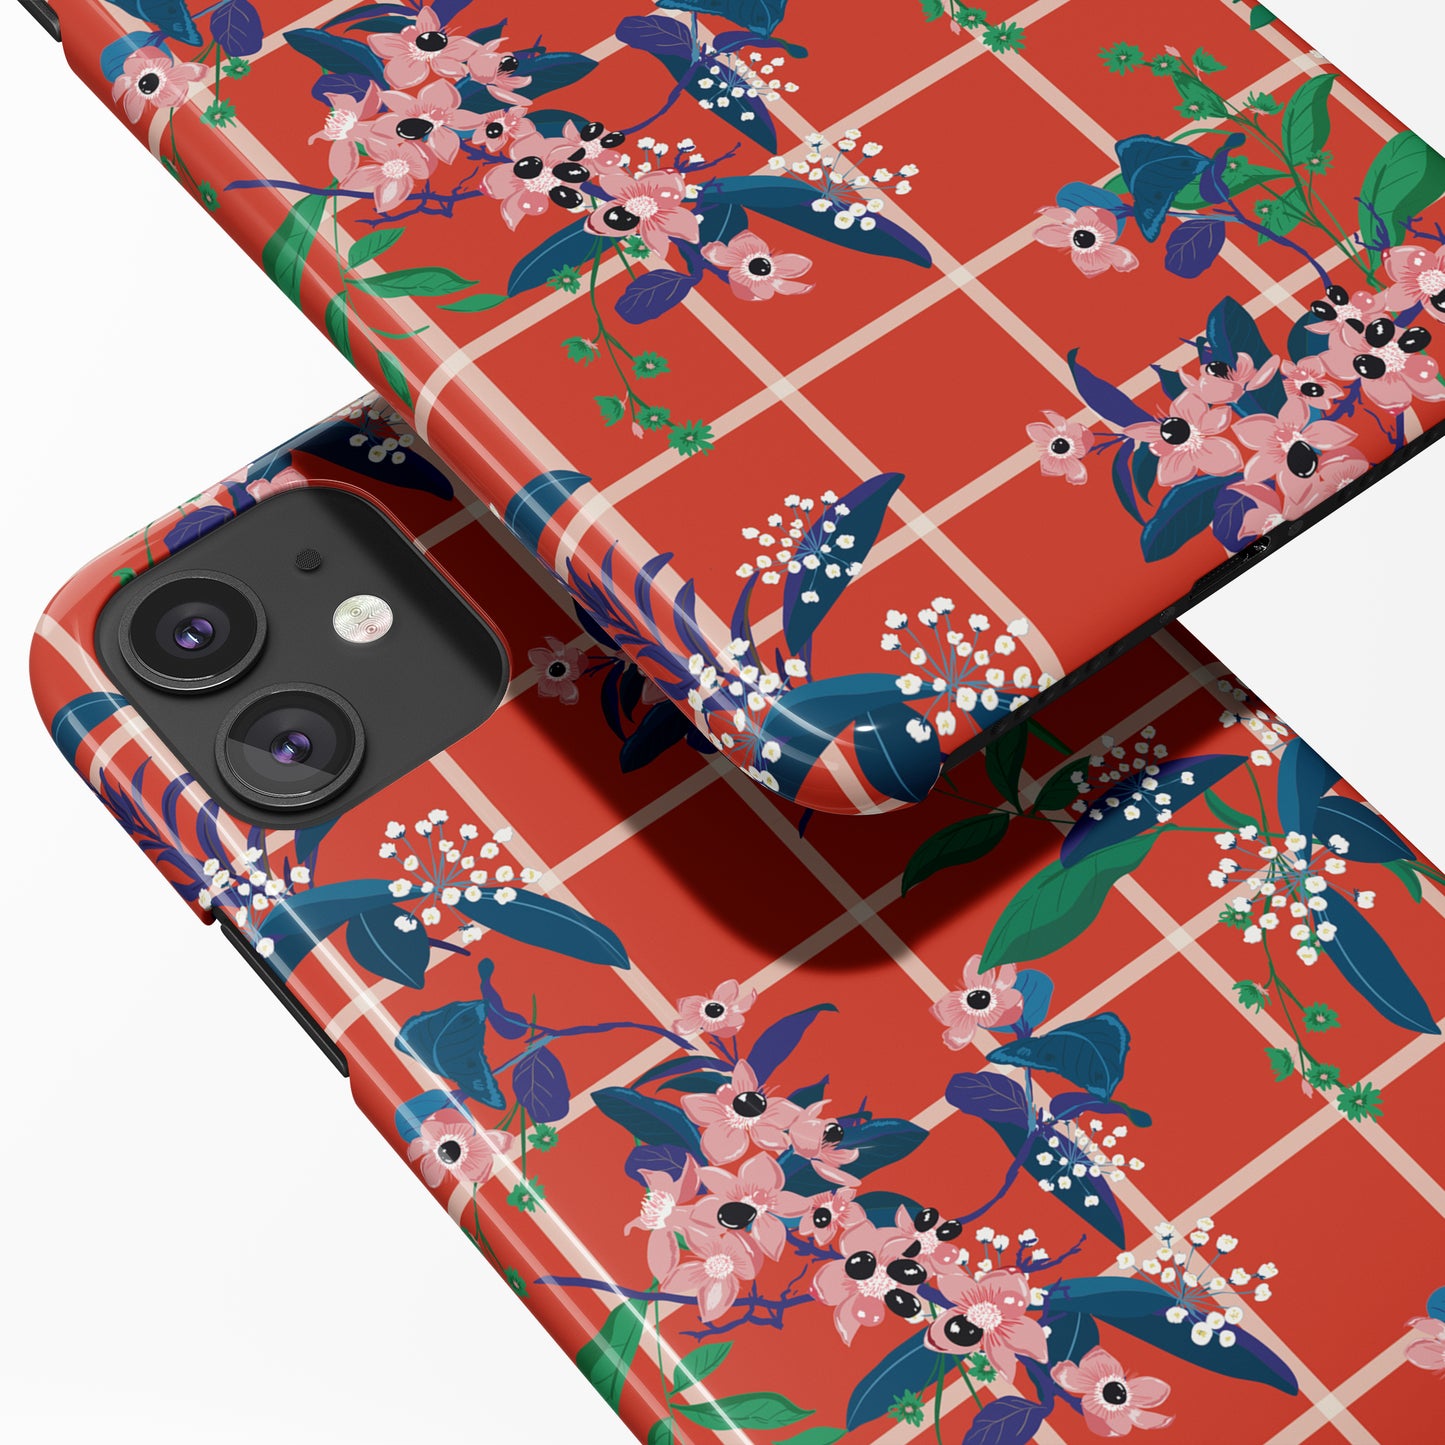 Red Checkered Flowers Pattern iPhone Case